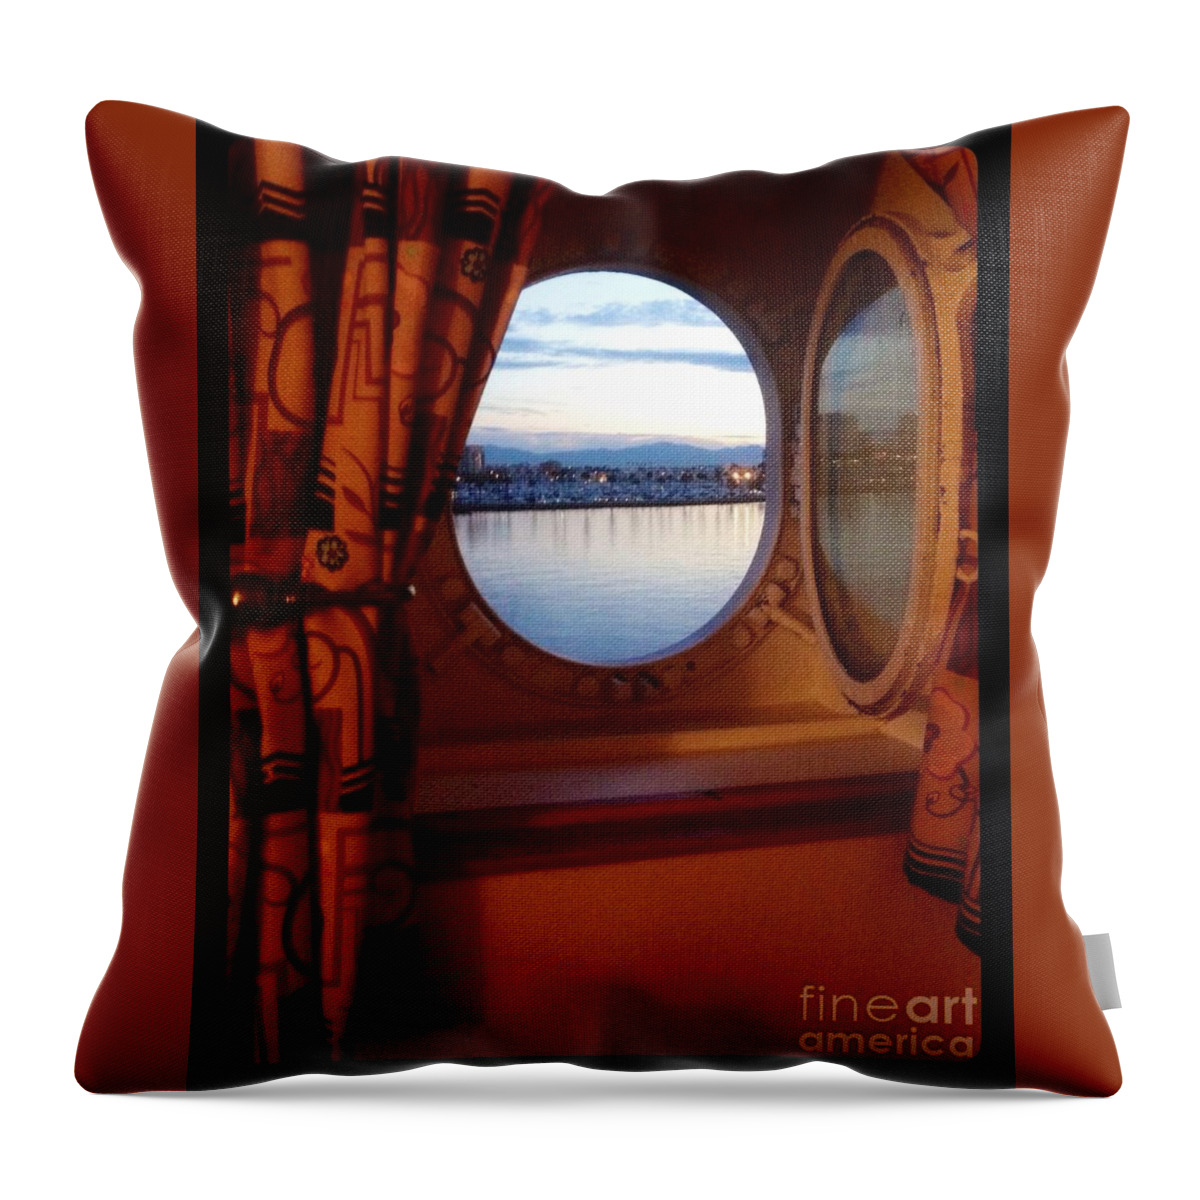 Cruise Ship Throw Pillow featuring the photograph Queen Mary Starboard Port View by Susan Garren